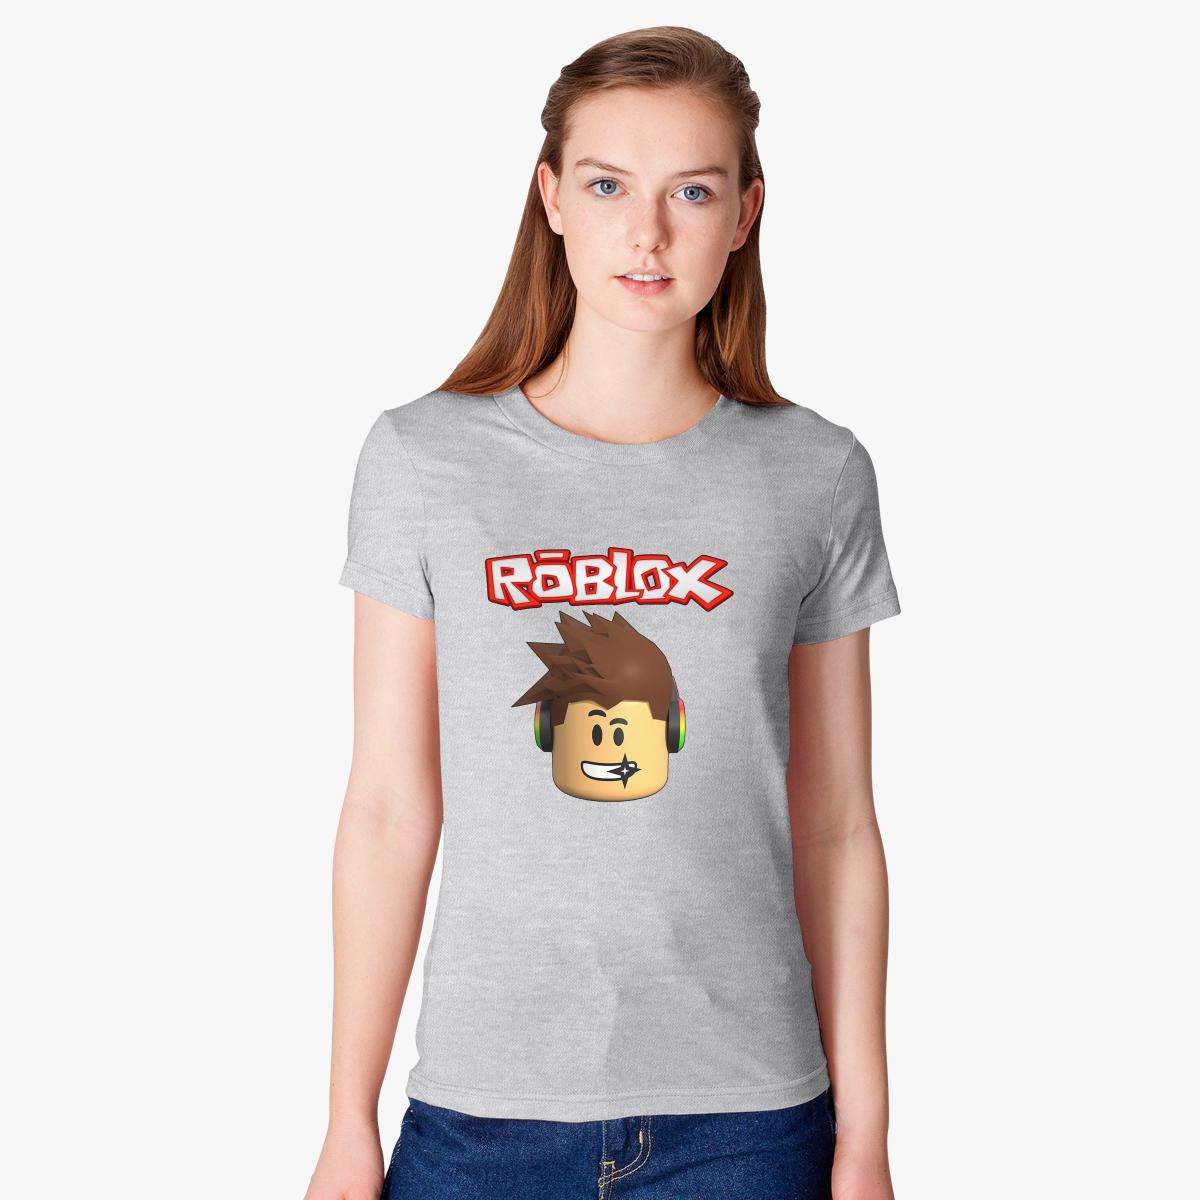 Custom Roblox Shirt Maker Buyudum Cocuk Oldum - where can i find a template for roblox clothes quora